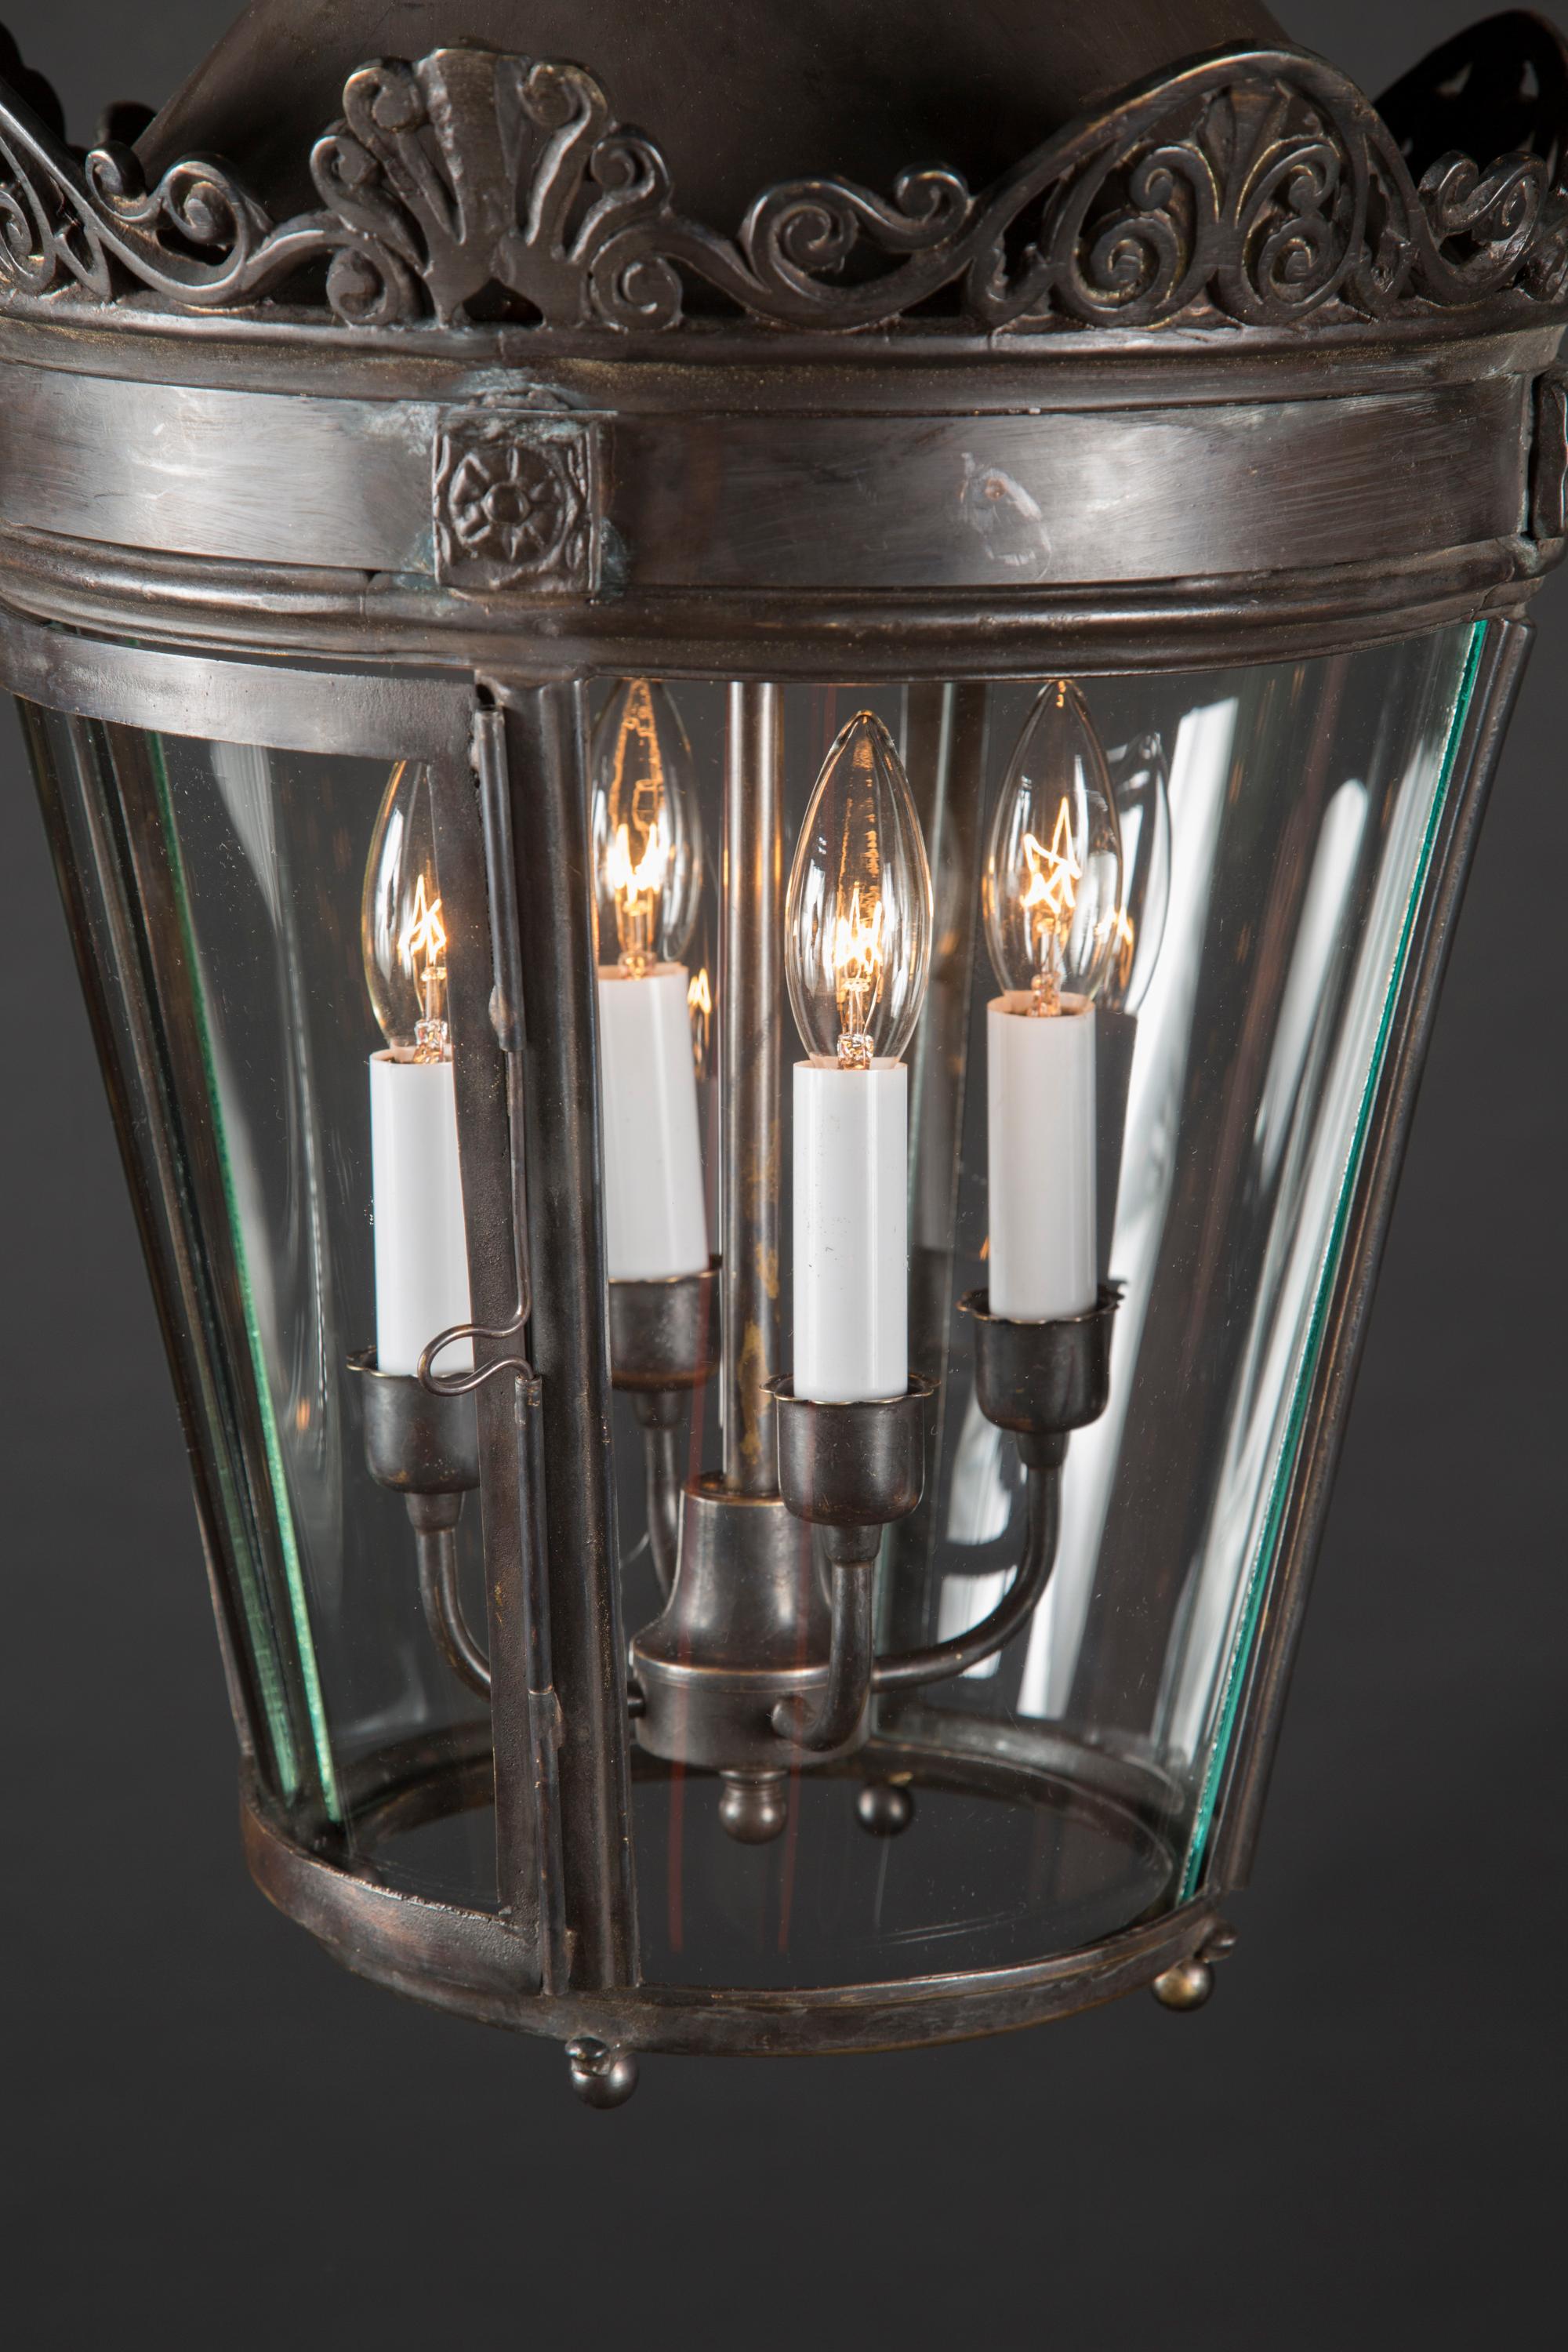 This unique bronze oscuro finish lantern features curved glasses and a detailed turret at top. The turret is reminiscent of the street lights which once stood tall on the streets of Paris, some of which were later converted to hanging lanterns like